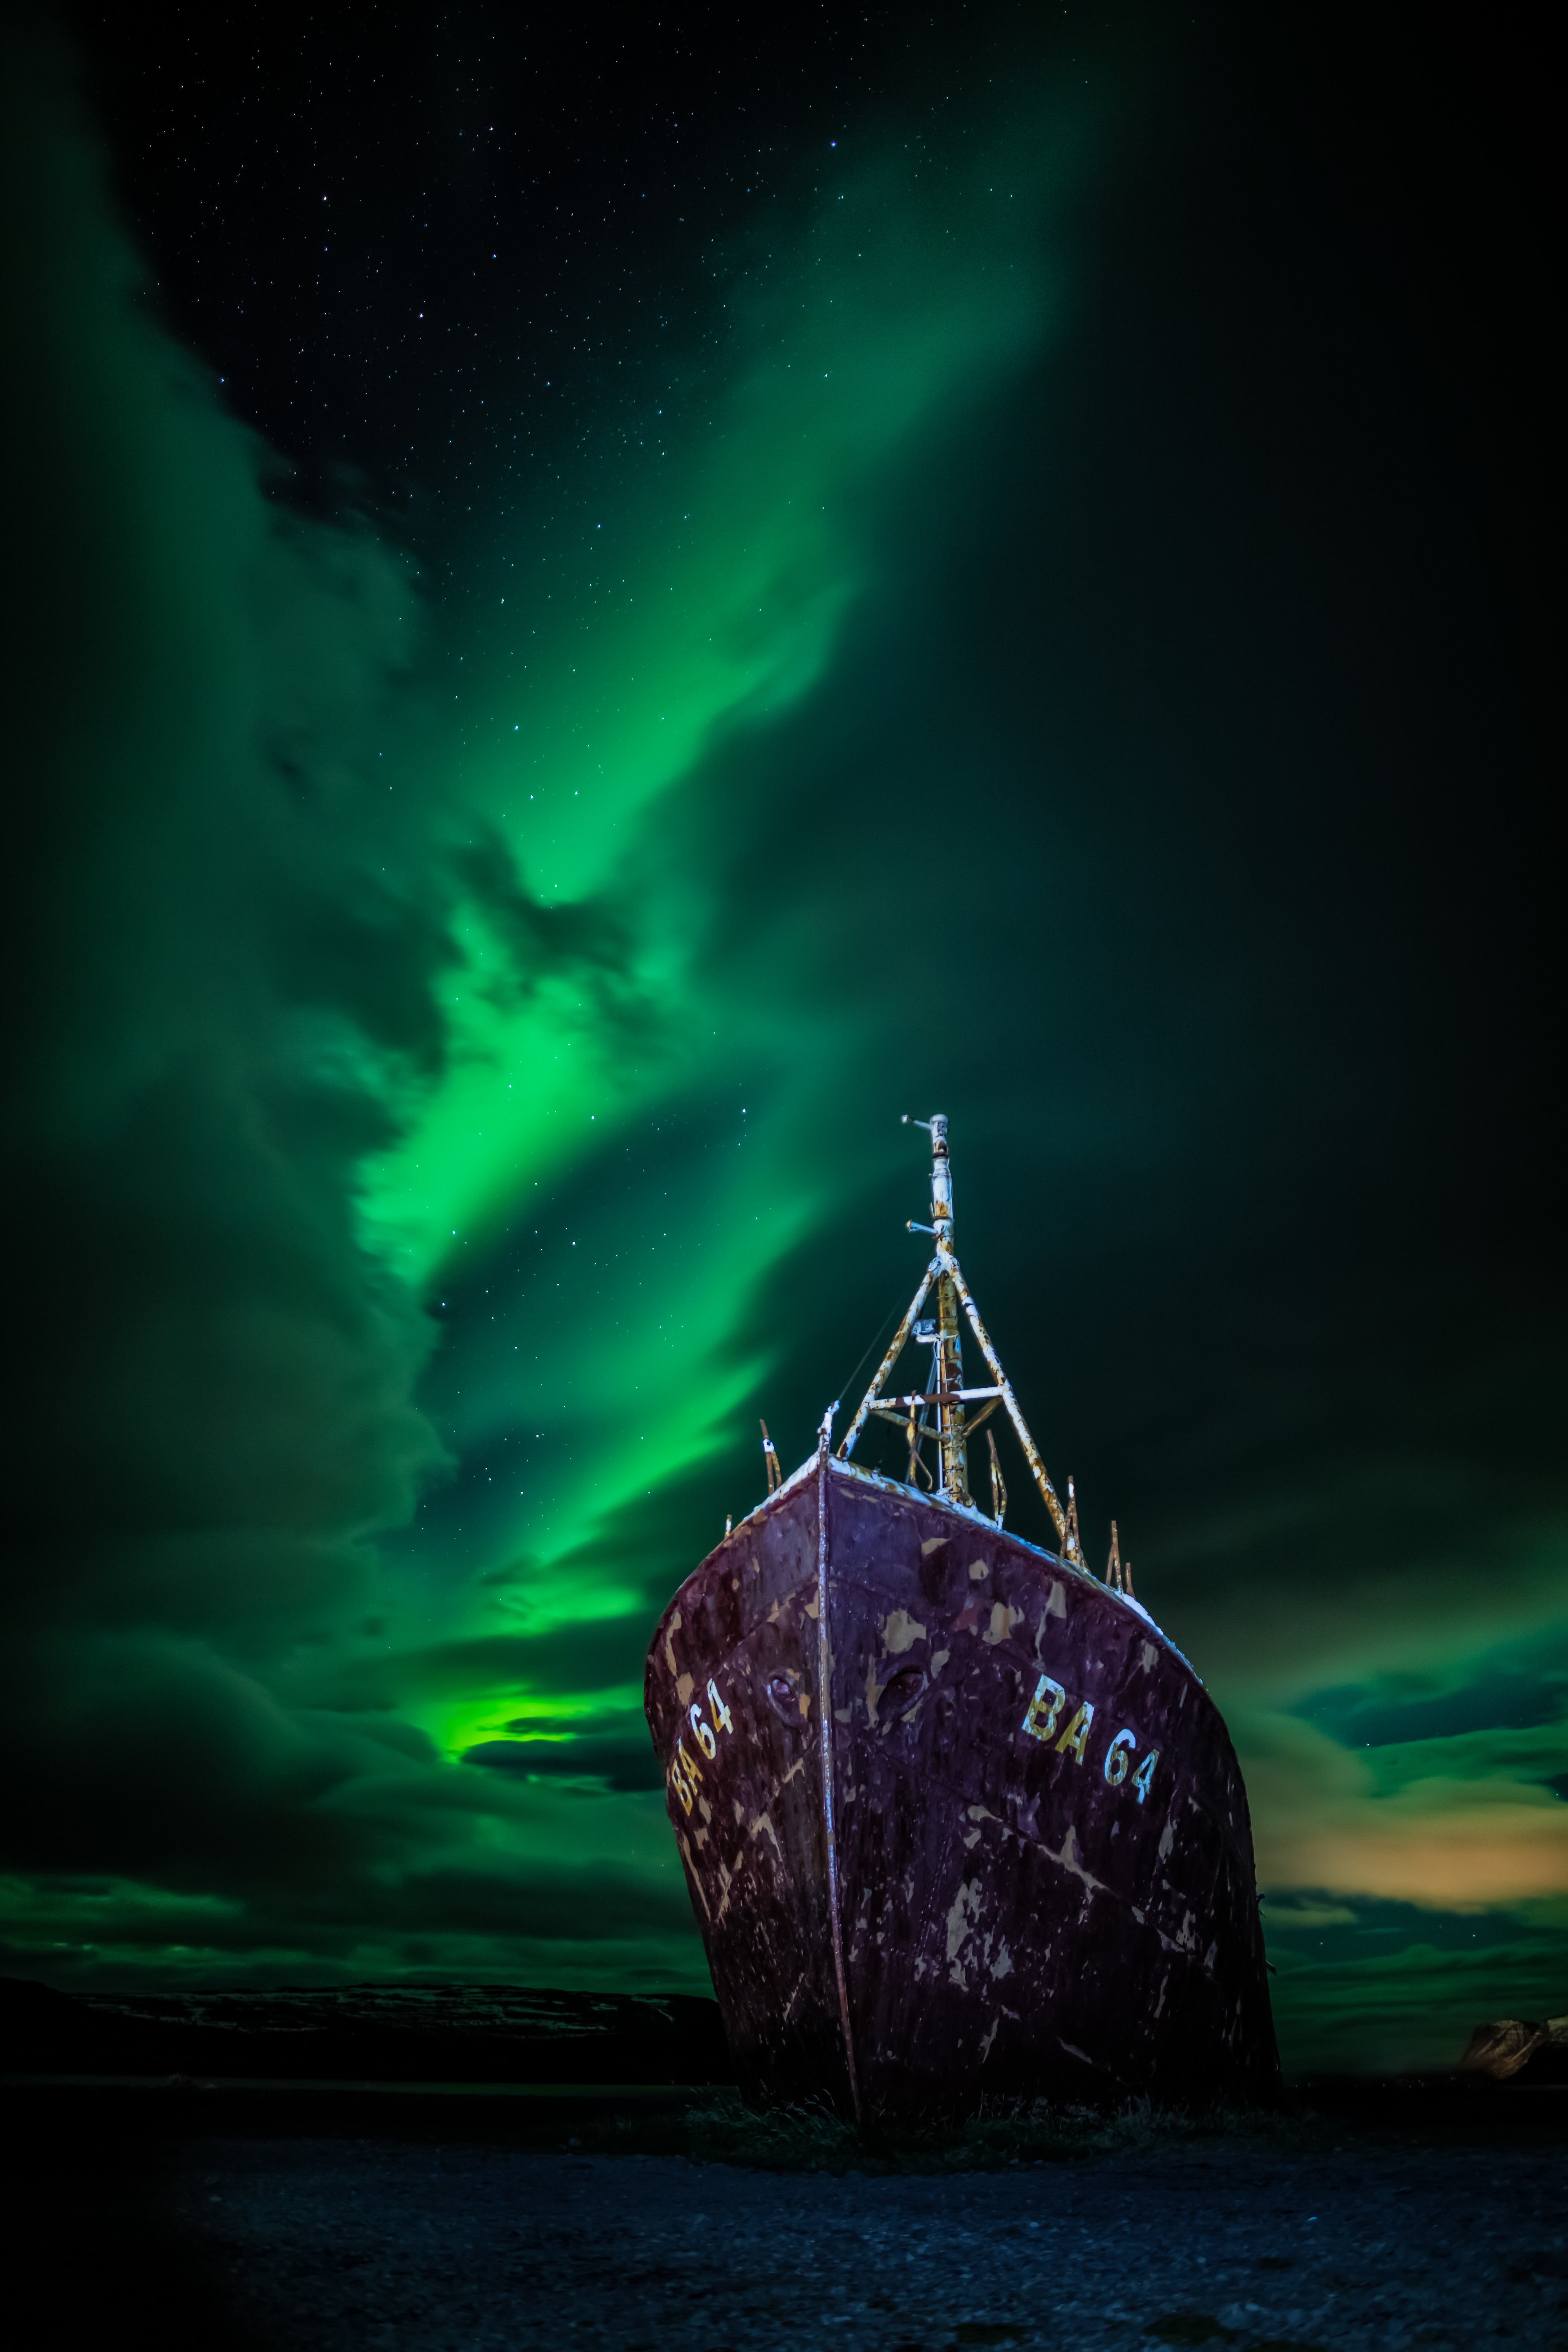 A shipwreck sits in the foreground, with the Northern Lights above it.  (Photo: © Carl Gallagher)